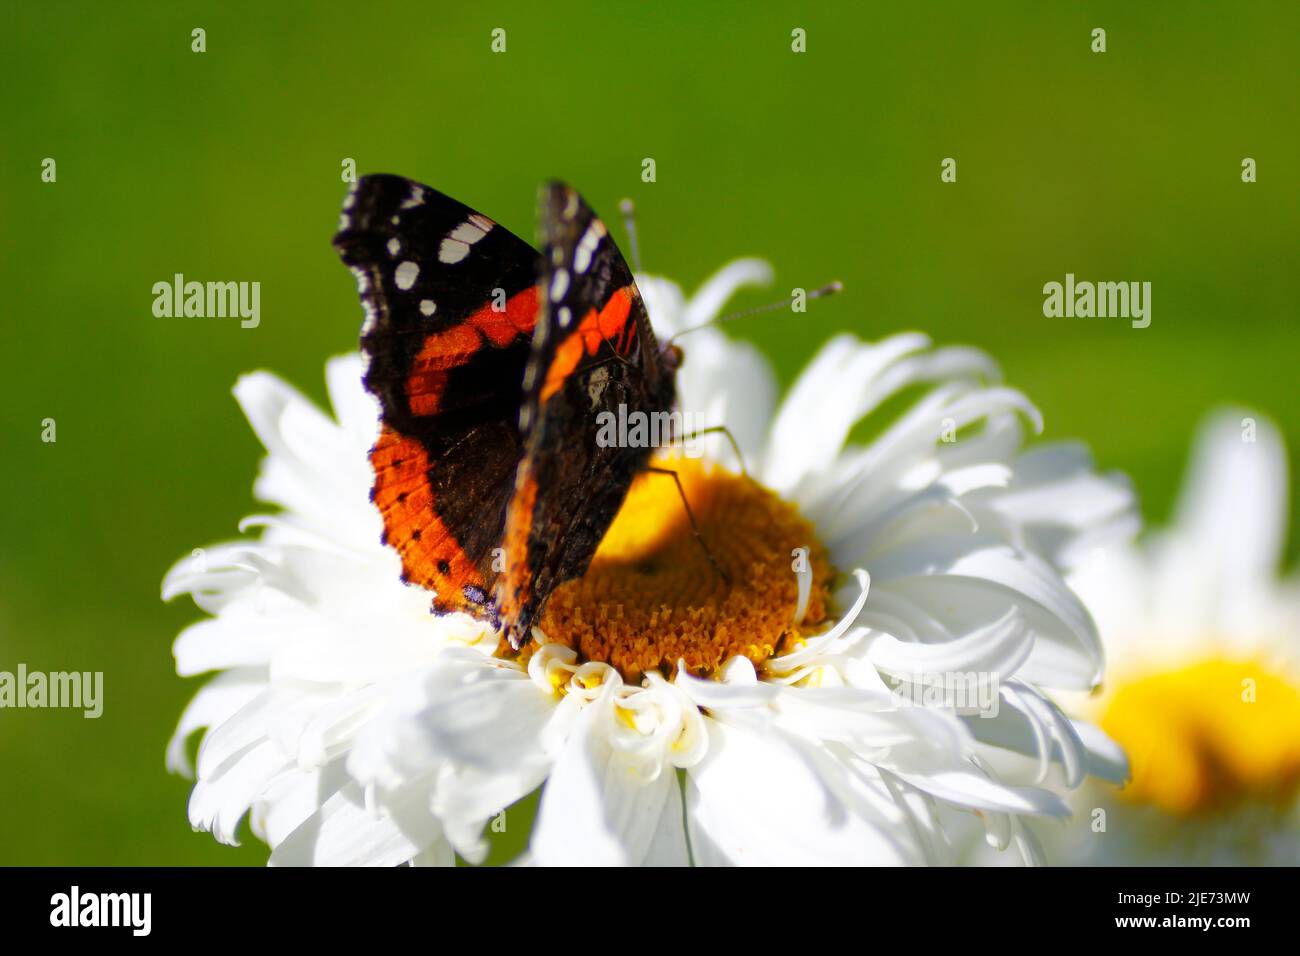 Red Admiral Butterfly (Vanessa atalanta) on a white daisy flower Stock Photo